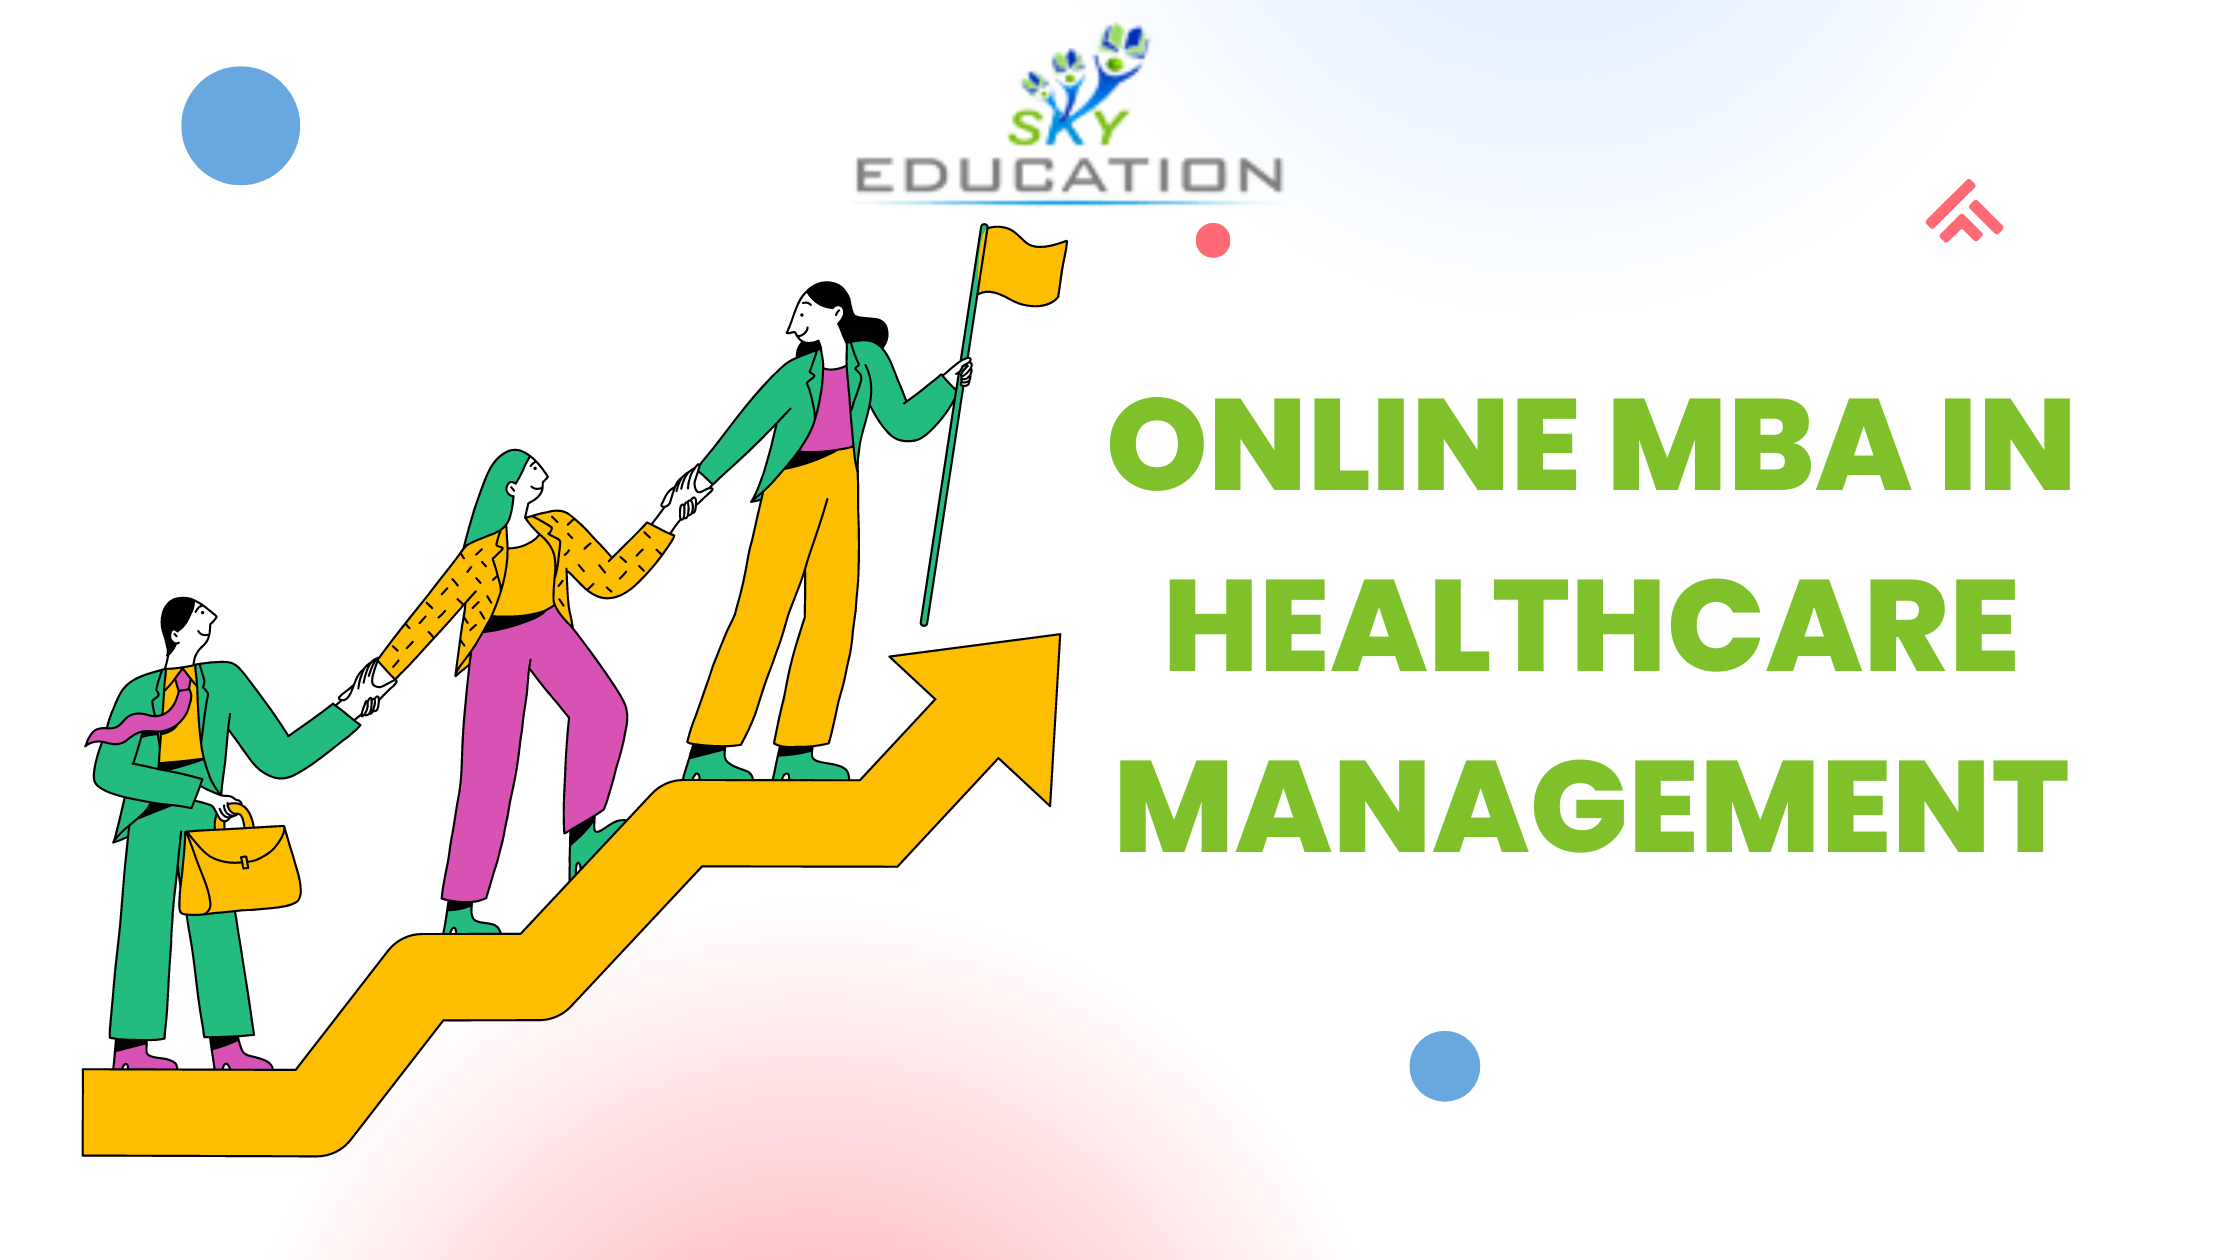 Career Advancements with an Online MBA in Healthcare Management